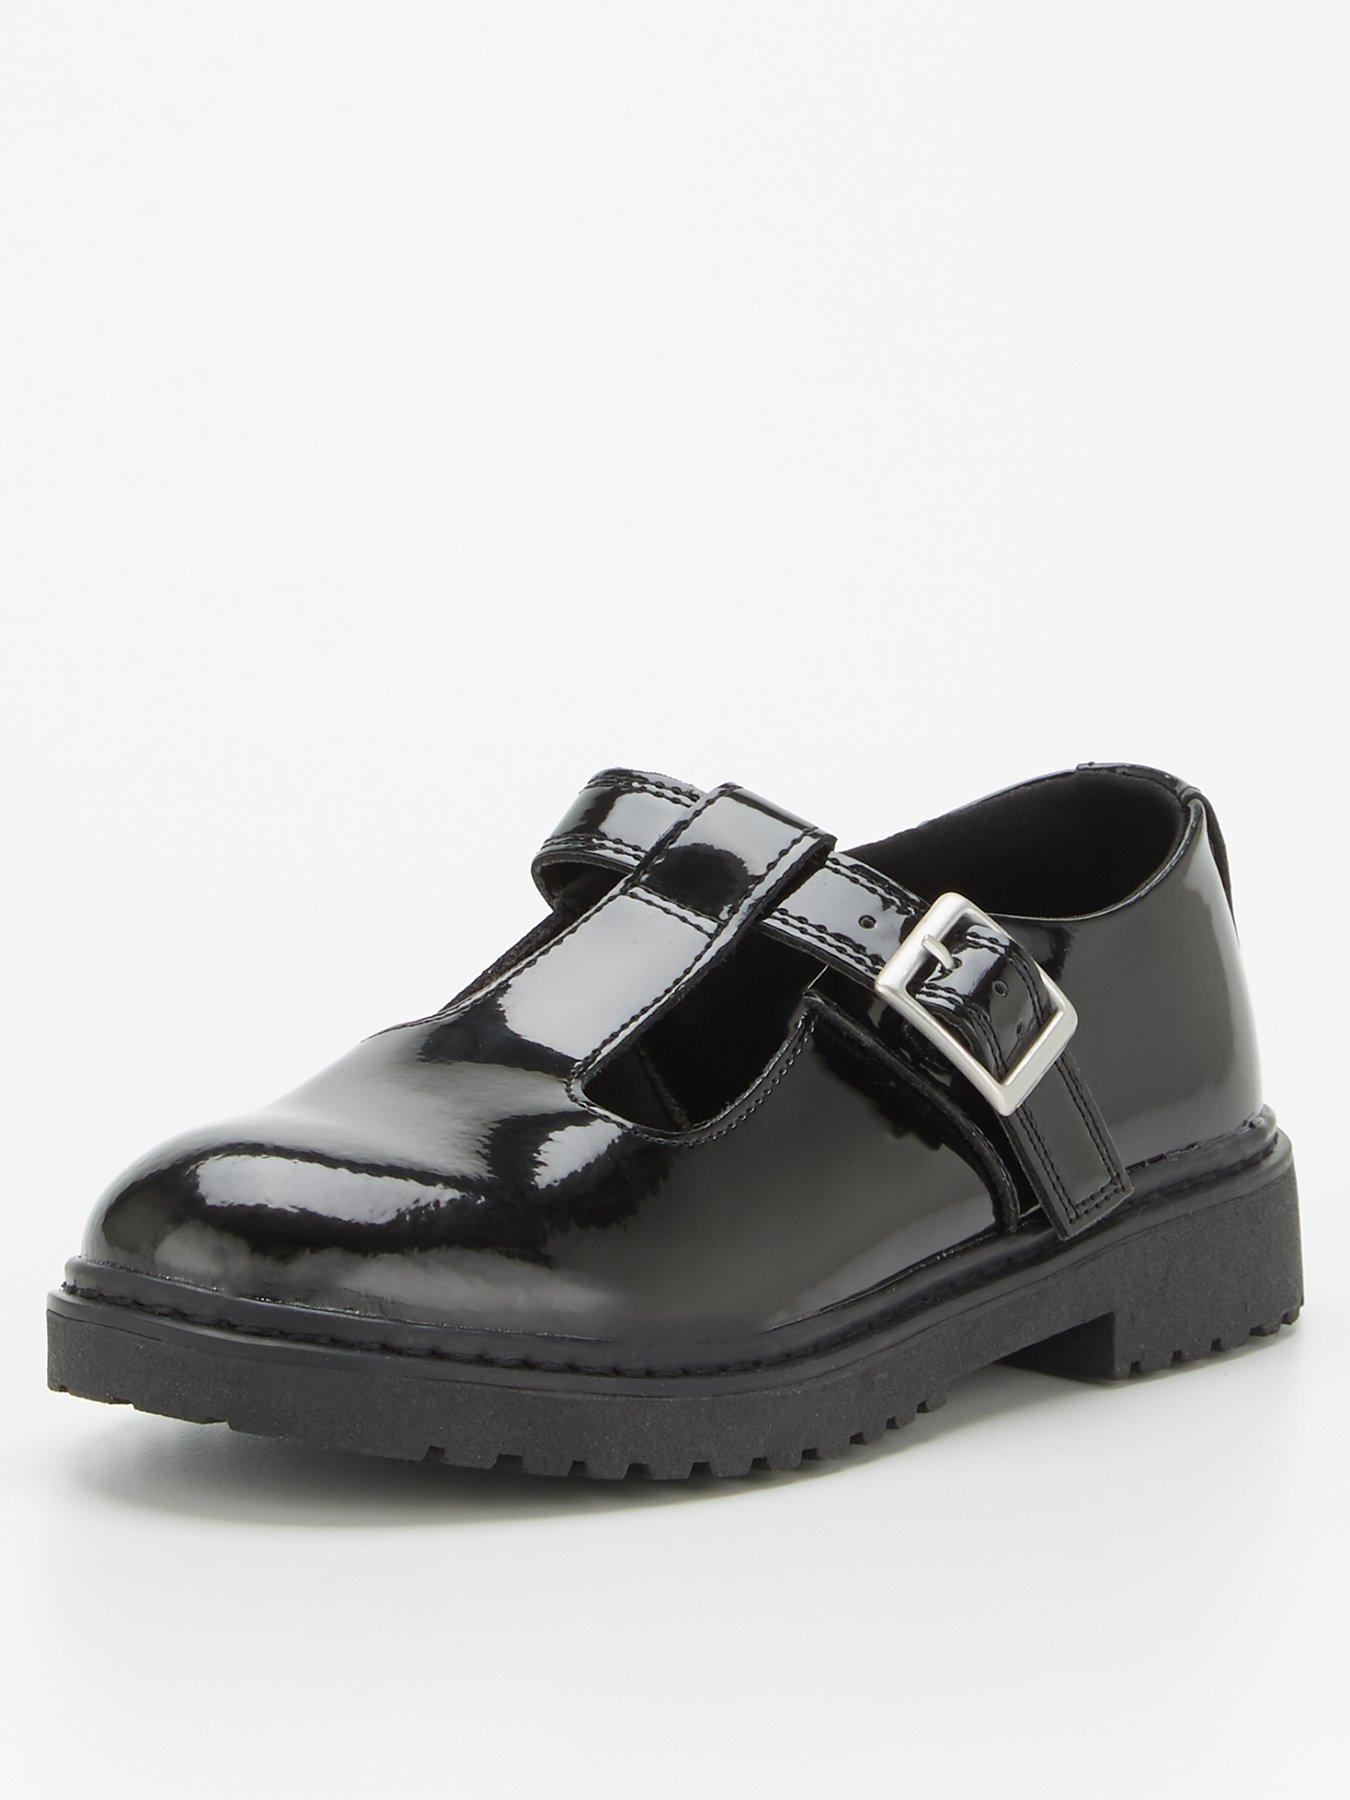 V by Very Girls Patent Leather T-bar School Shoe - Black | littlewoods.com